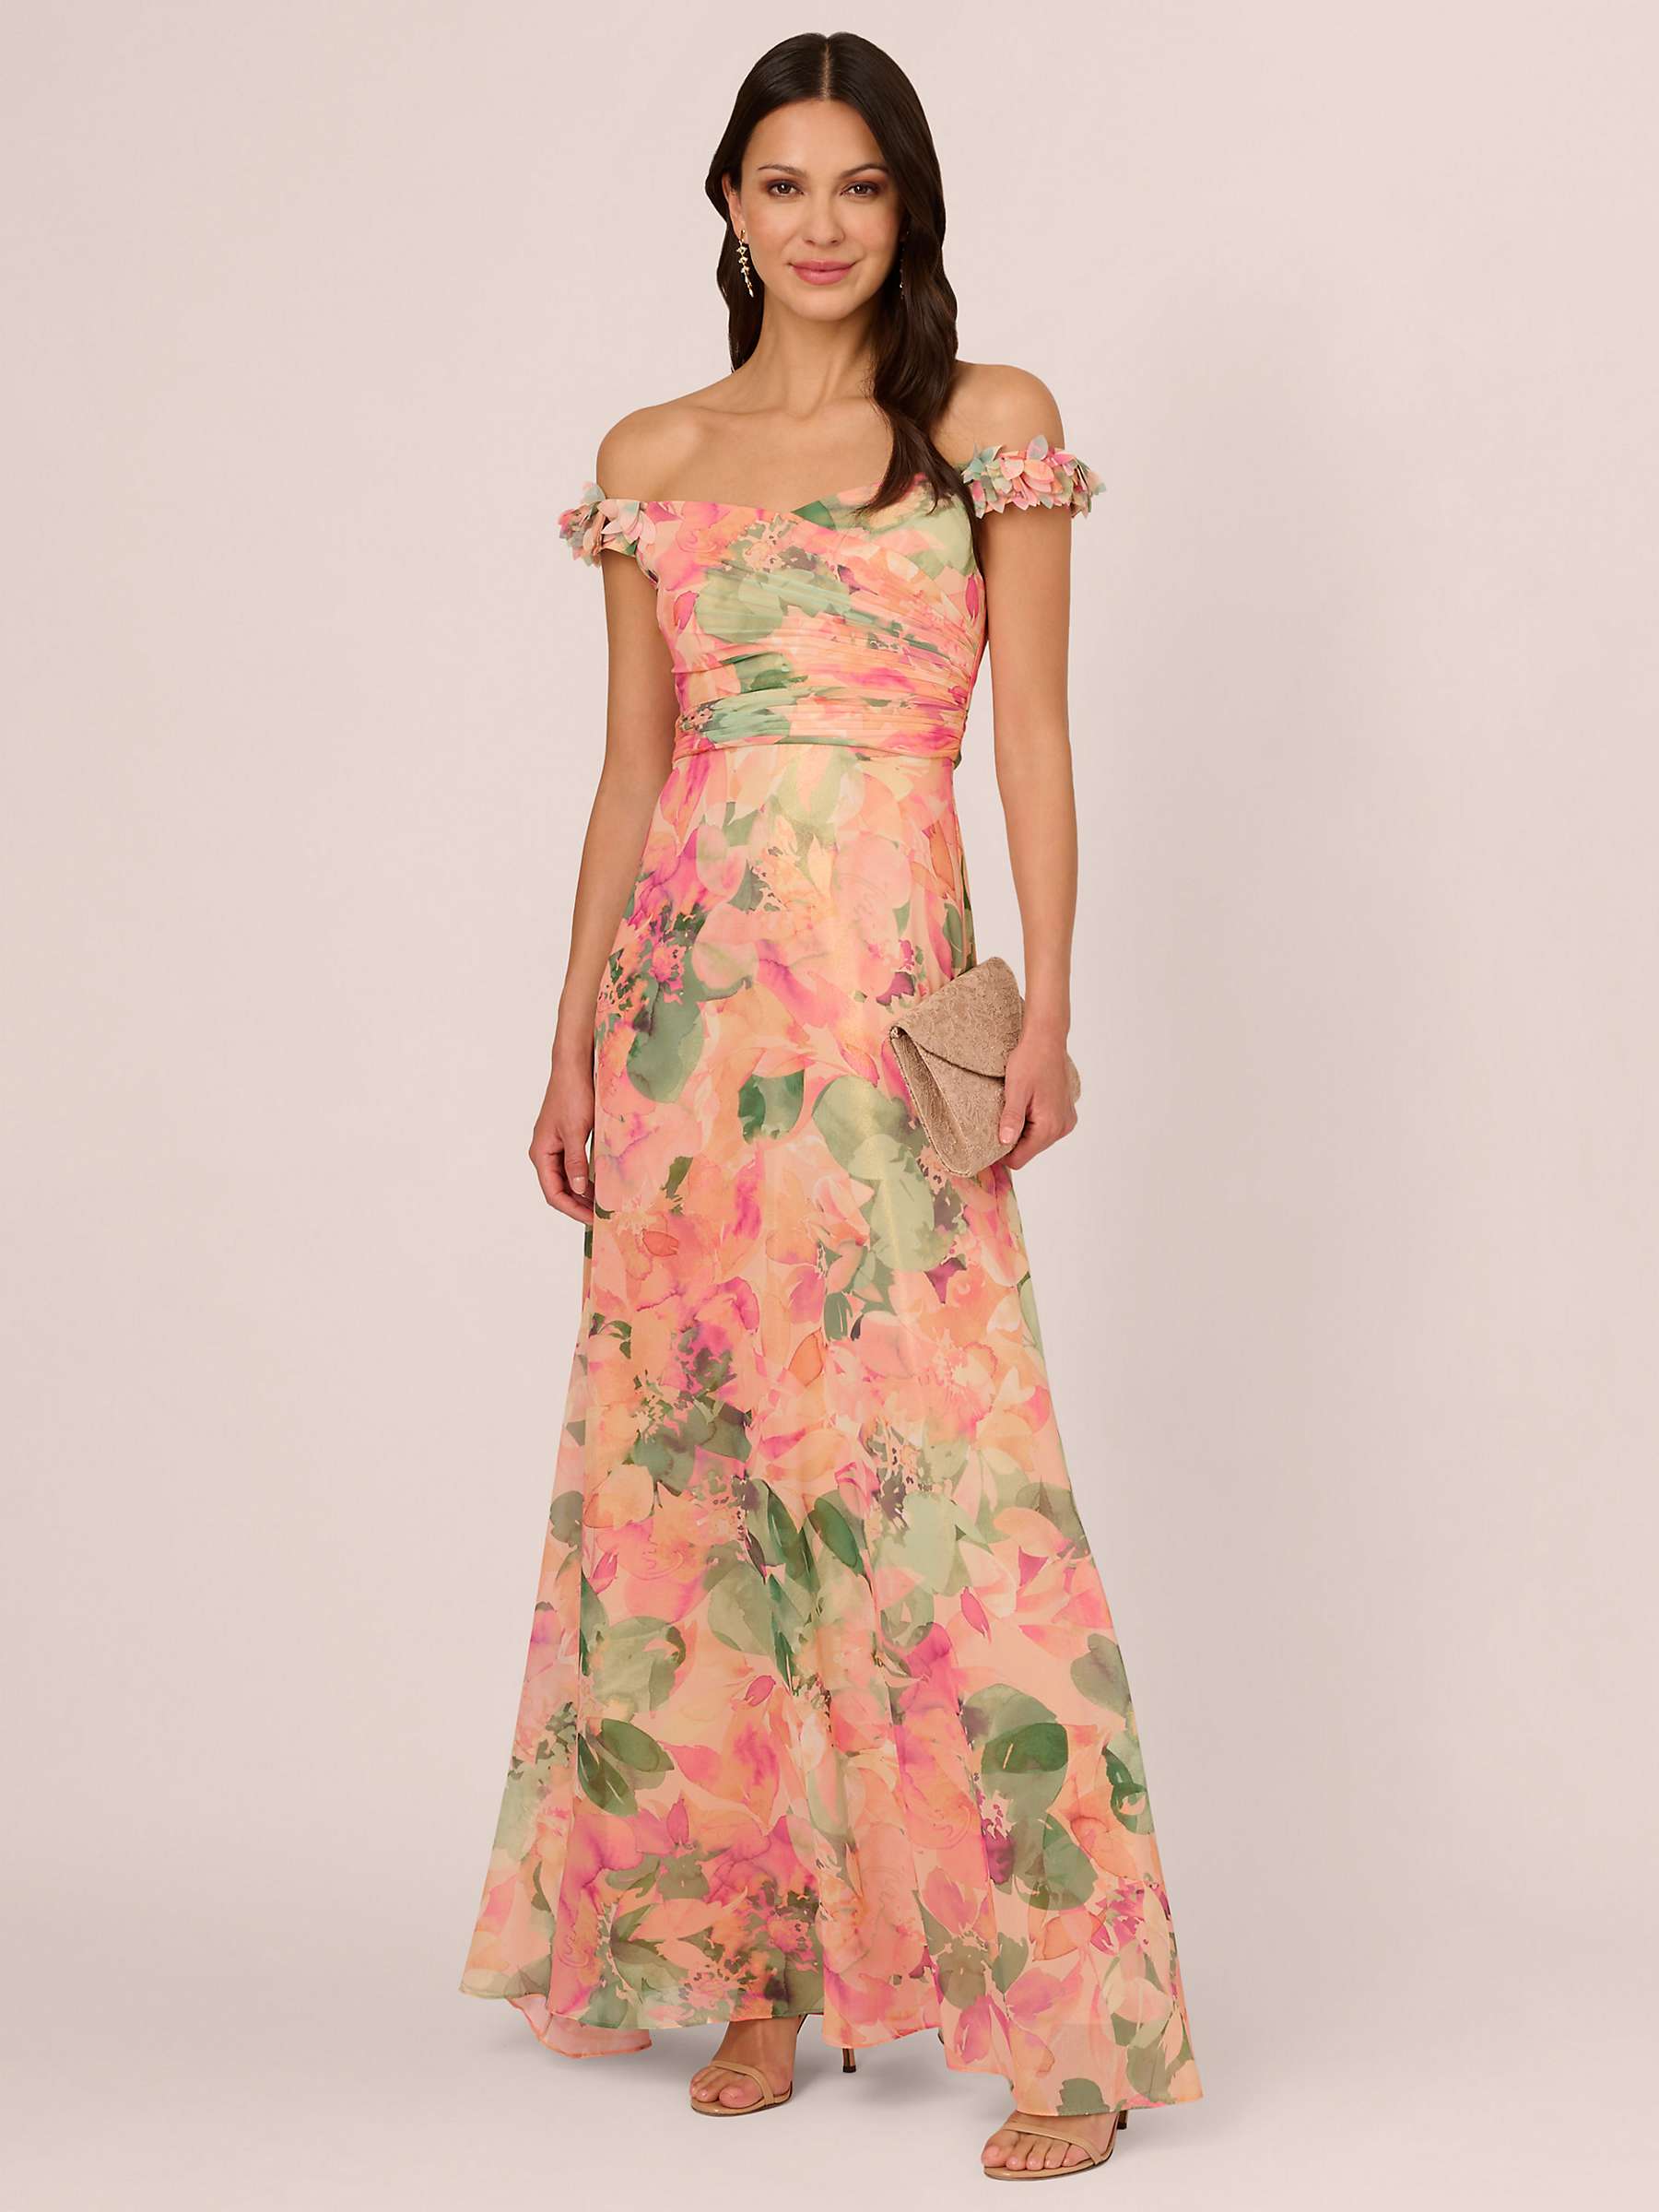 Buy Adrianna Papell Floral Chiffon Maxi Dress, Blush/Multi Online at johnlewis.com